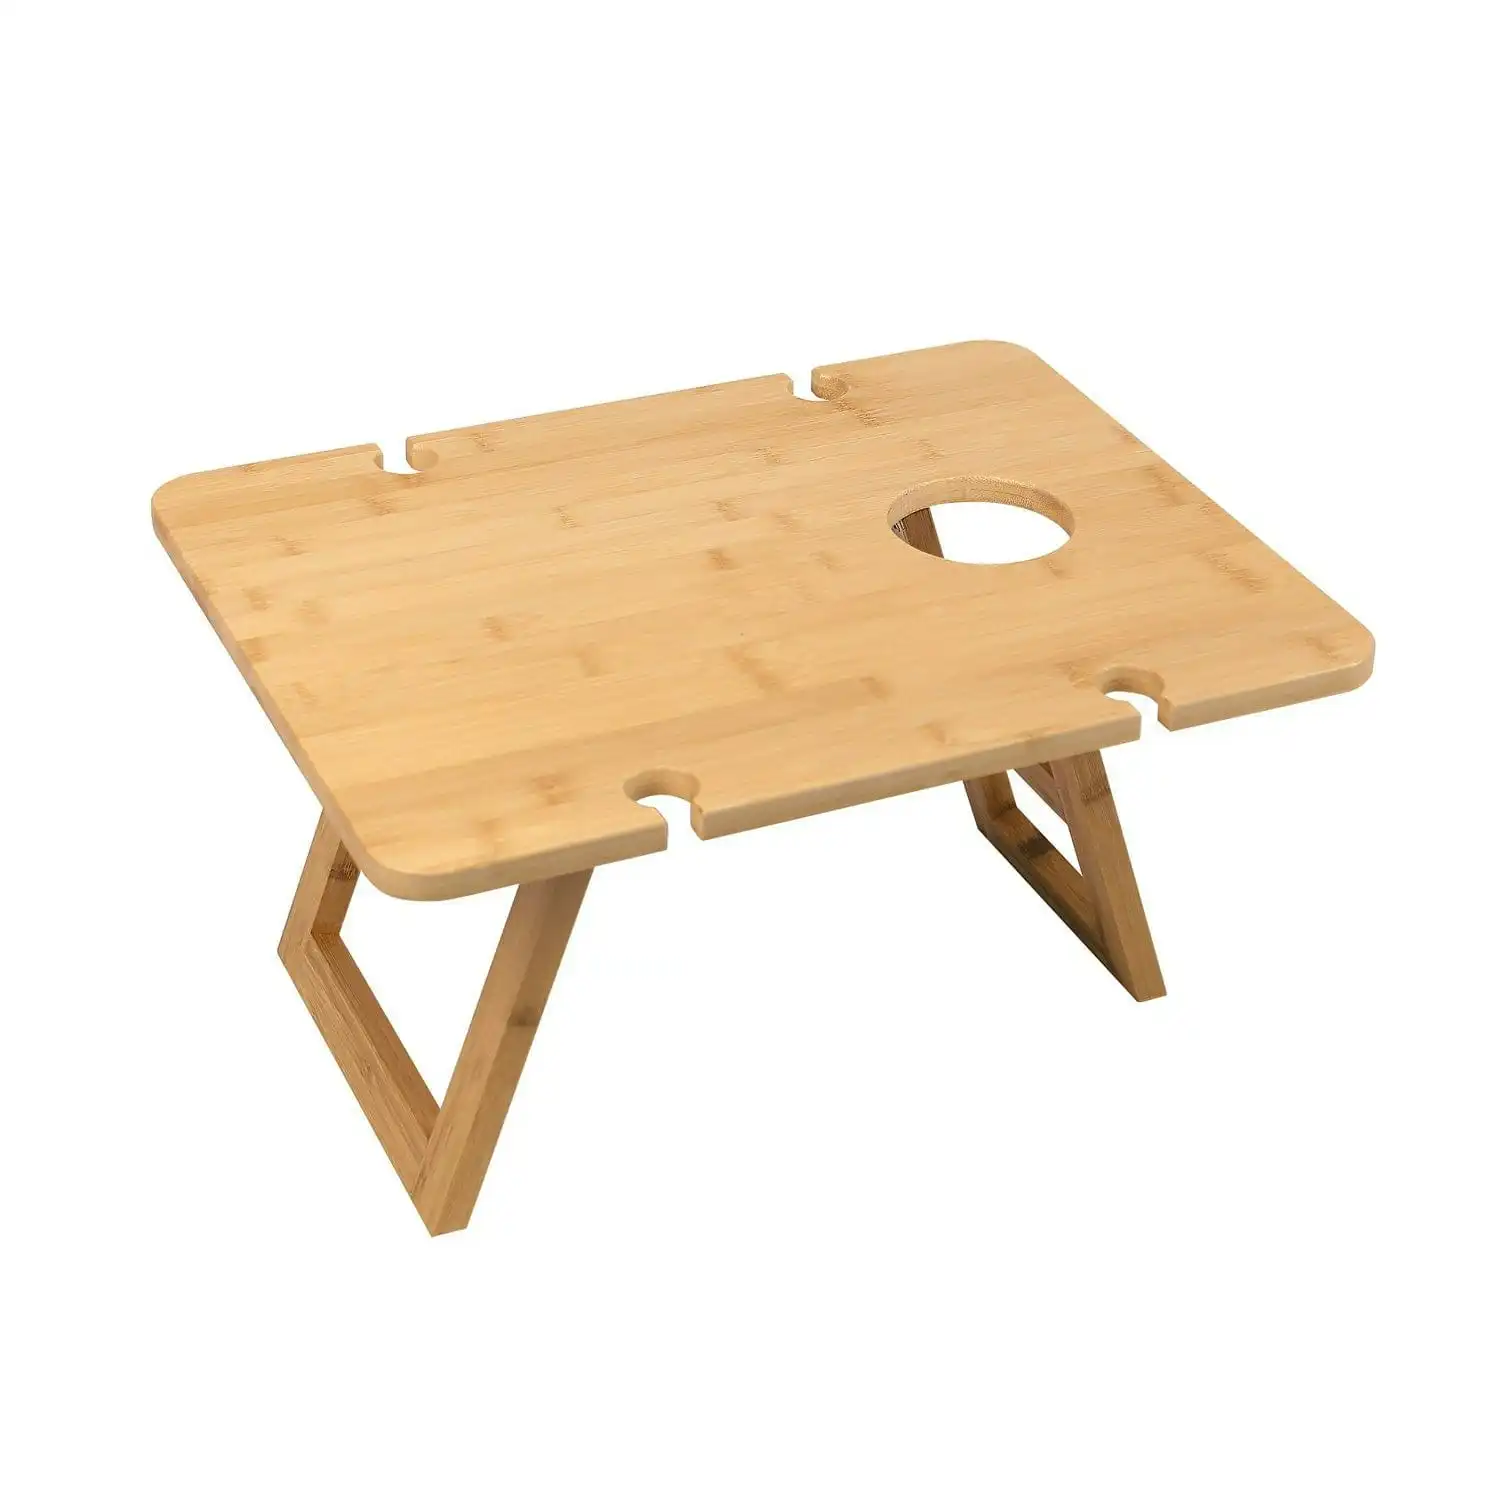 Bamboo Foldable Picnic Table Tray with Wine and Glass Holders